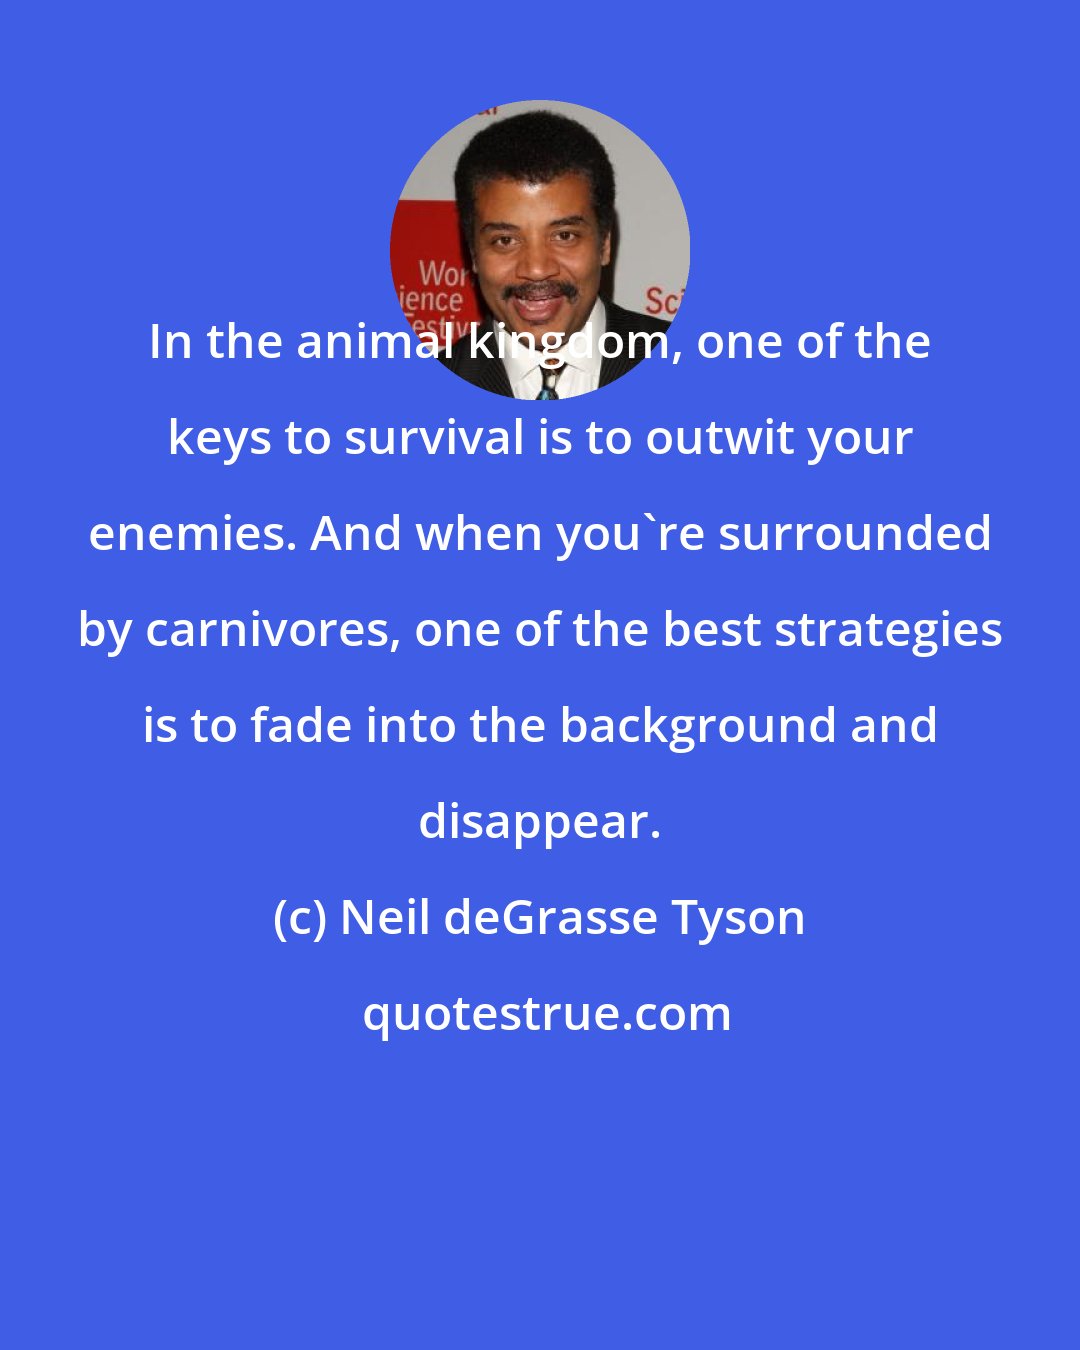 Neil deGrasse Tyson: In the animal kingdom, one of the keys to survival is to outwit your enemies. And when you're surrounded by carnivores, one of the best strategies is to fade into the background and disappear.